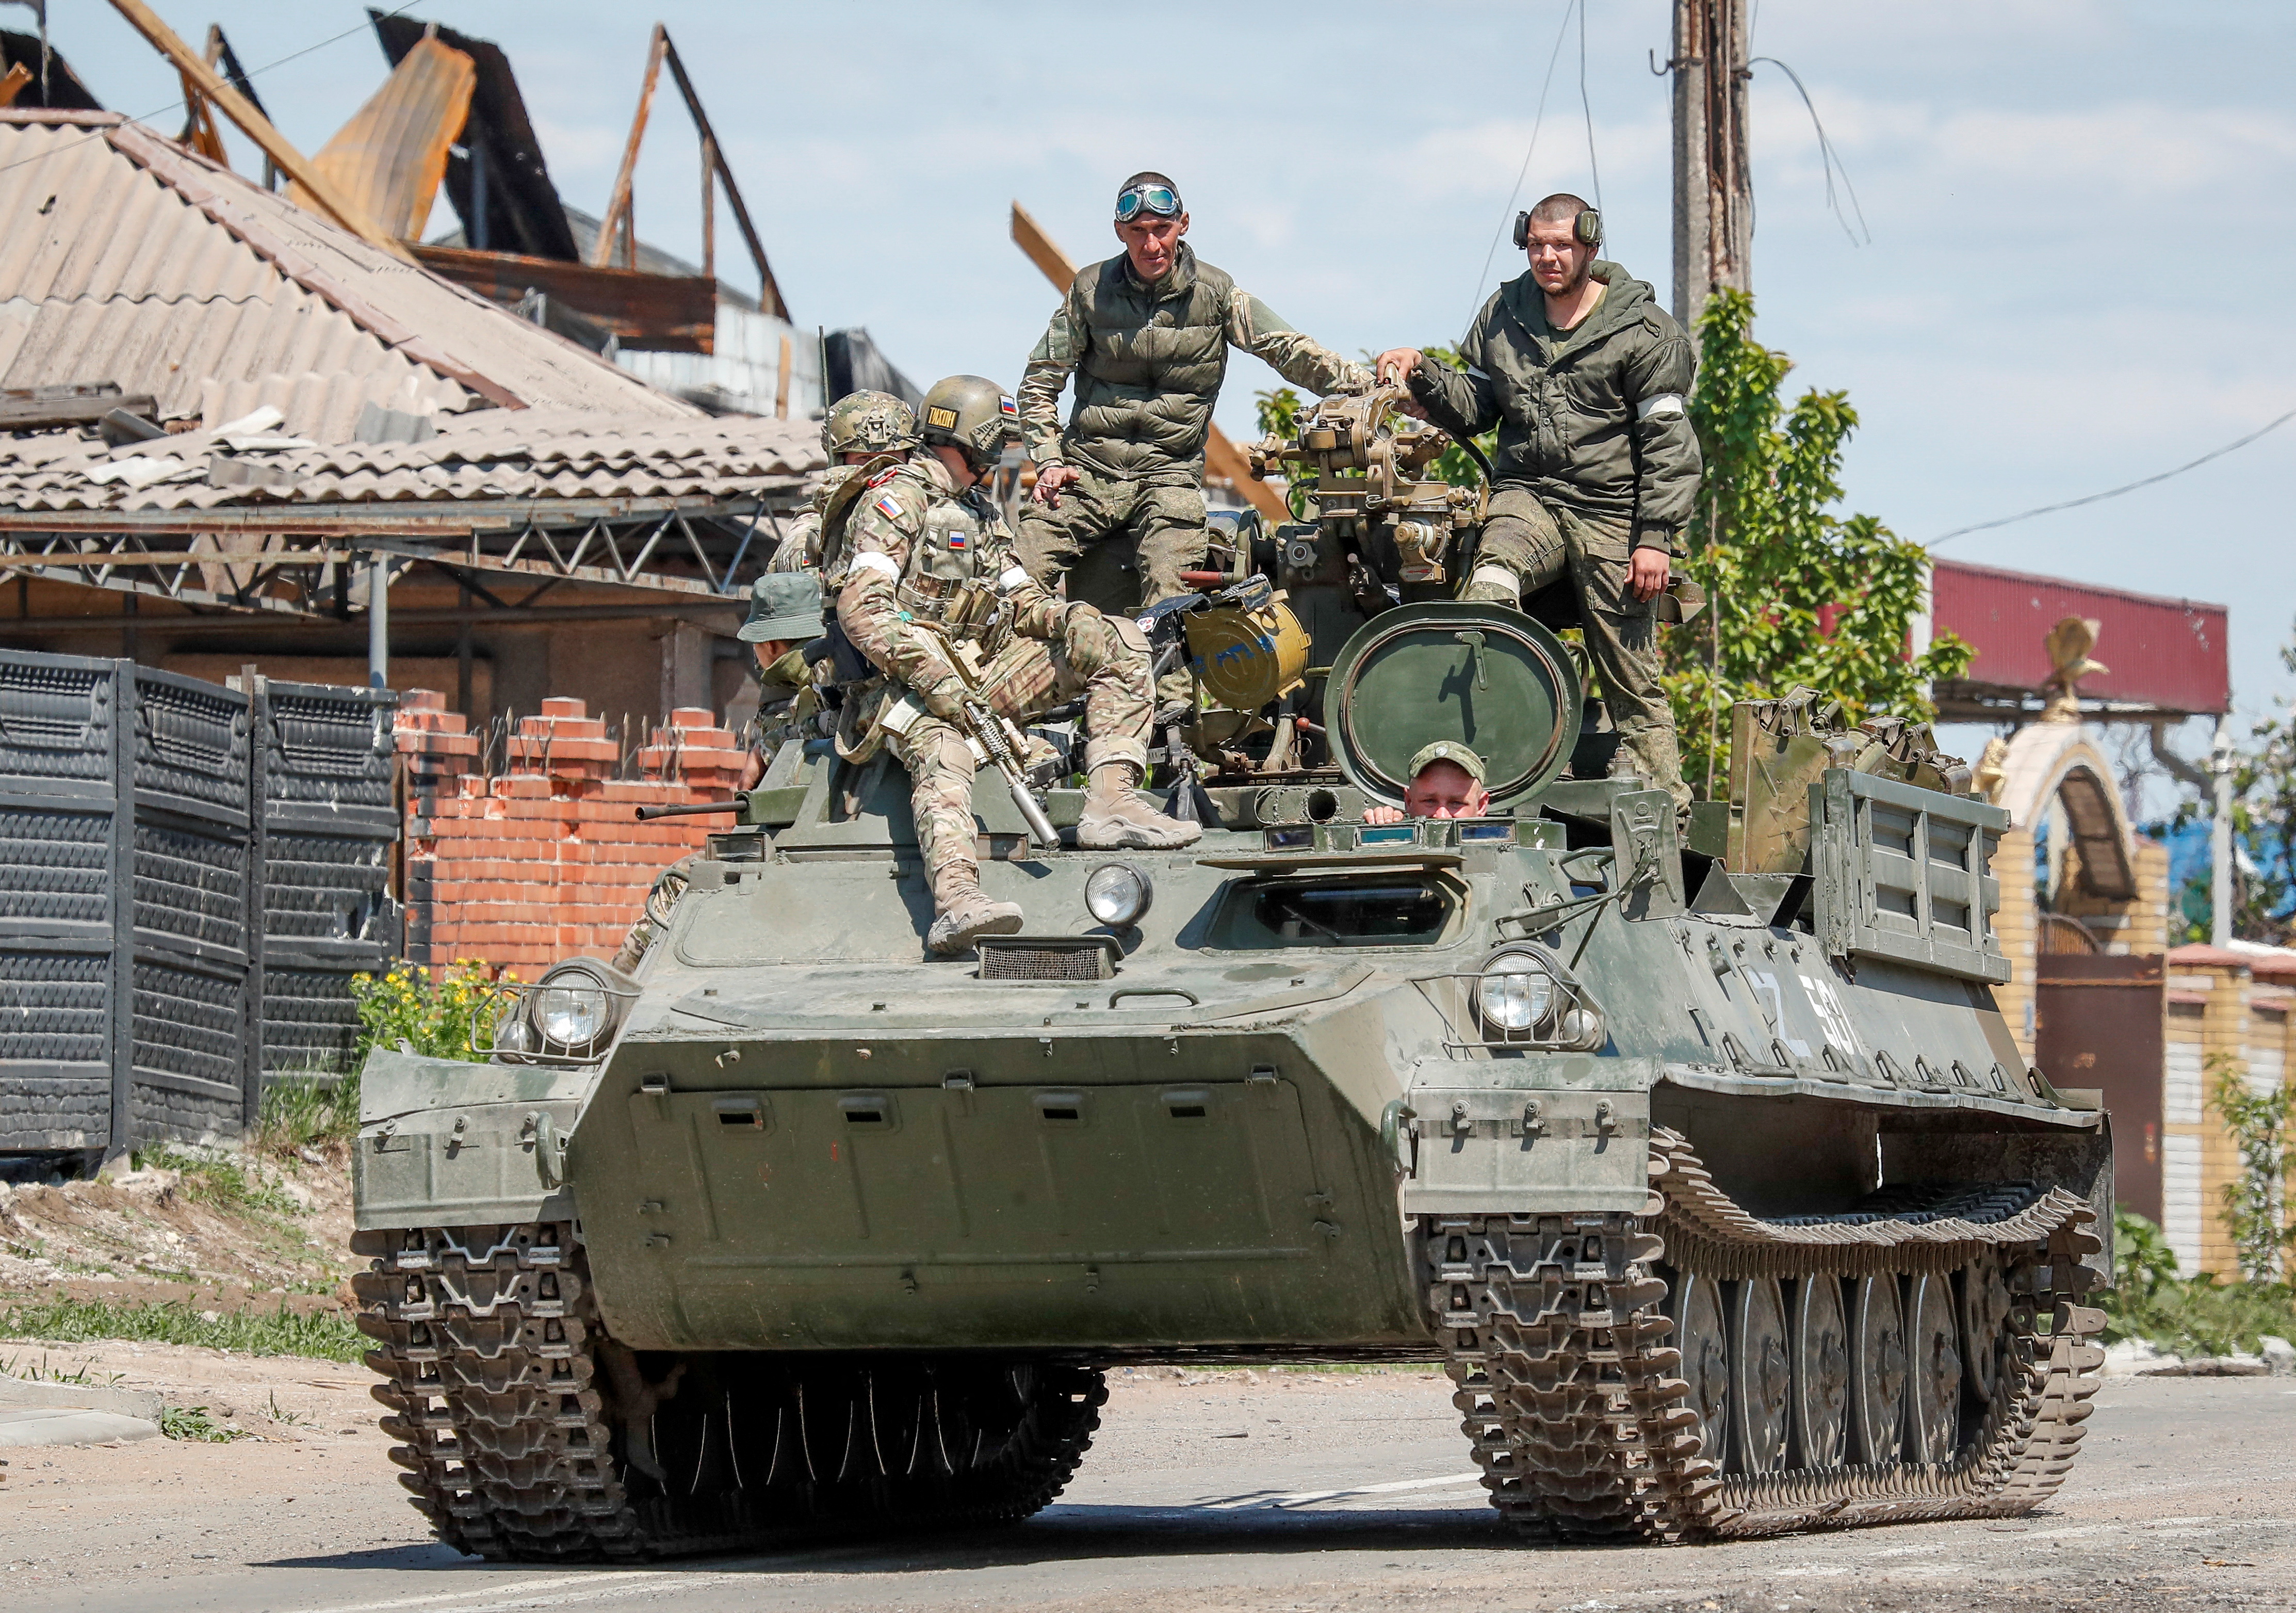 Russian troops maintain the siege on the city of Mariupol